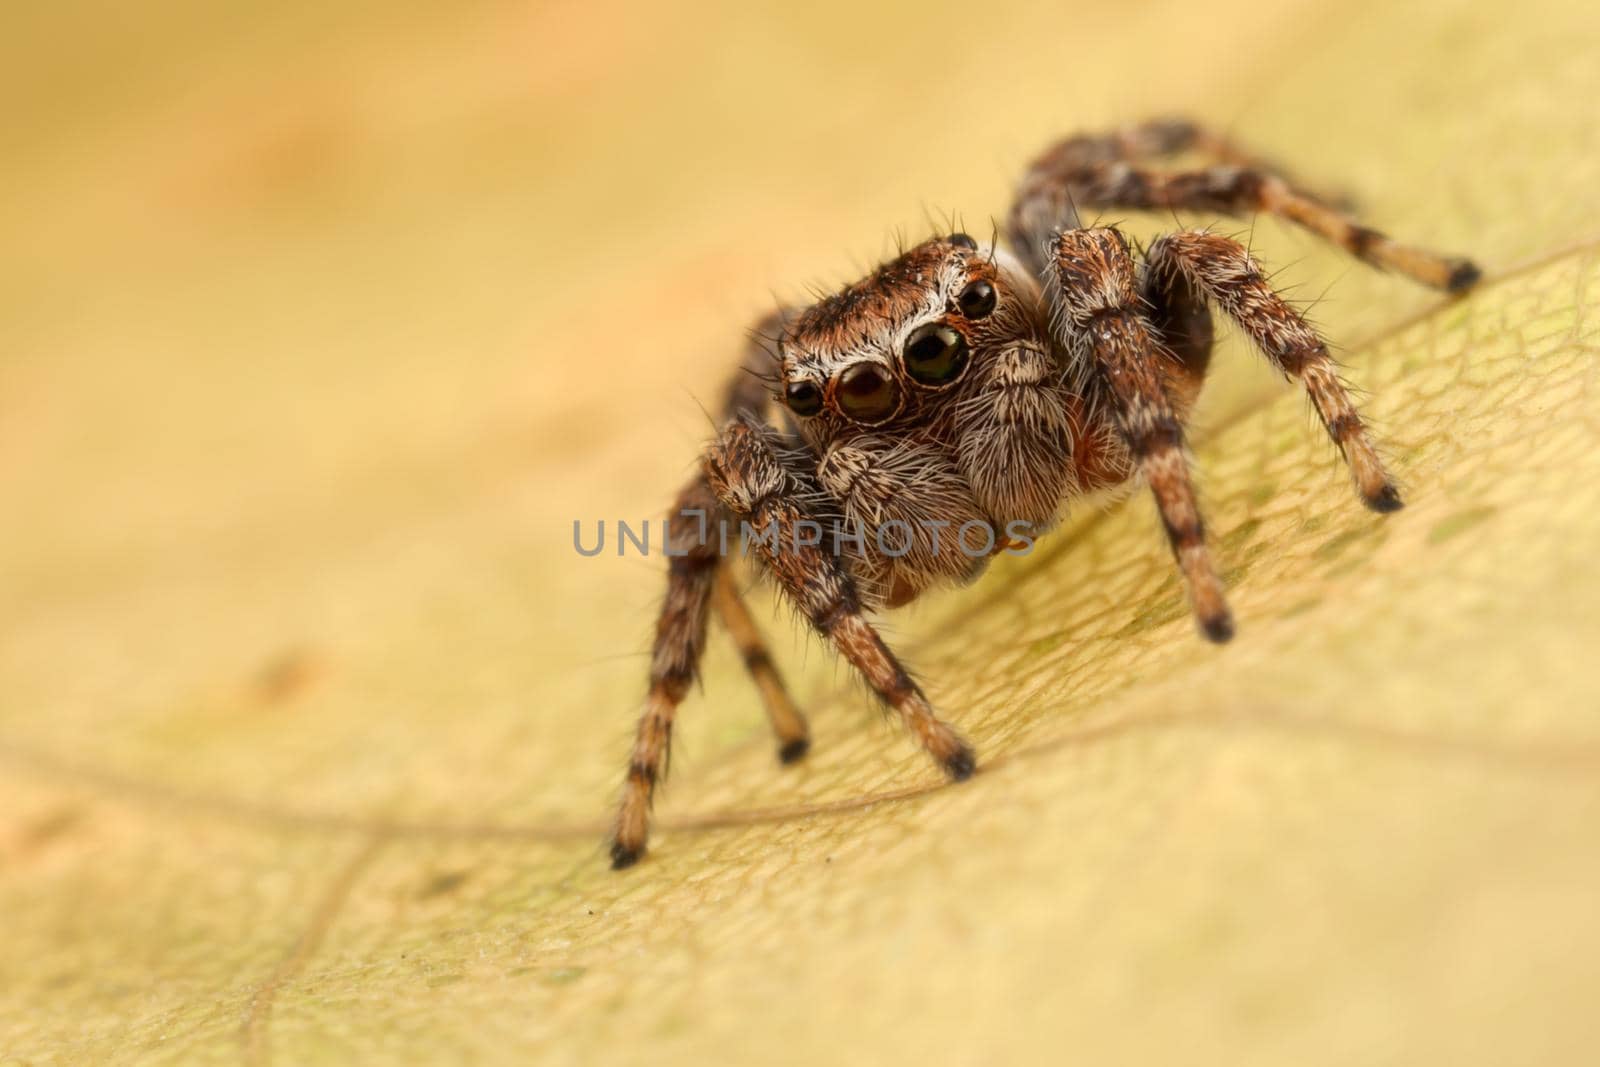 Jumping spider on the autumn leaf by Lincikas